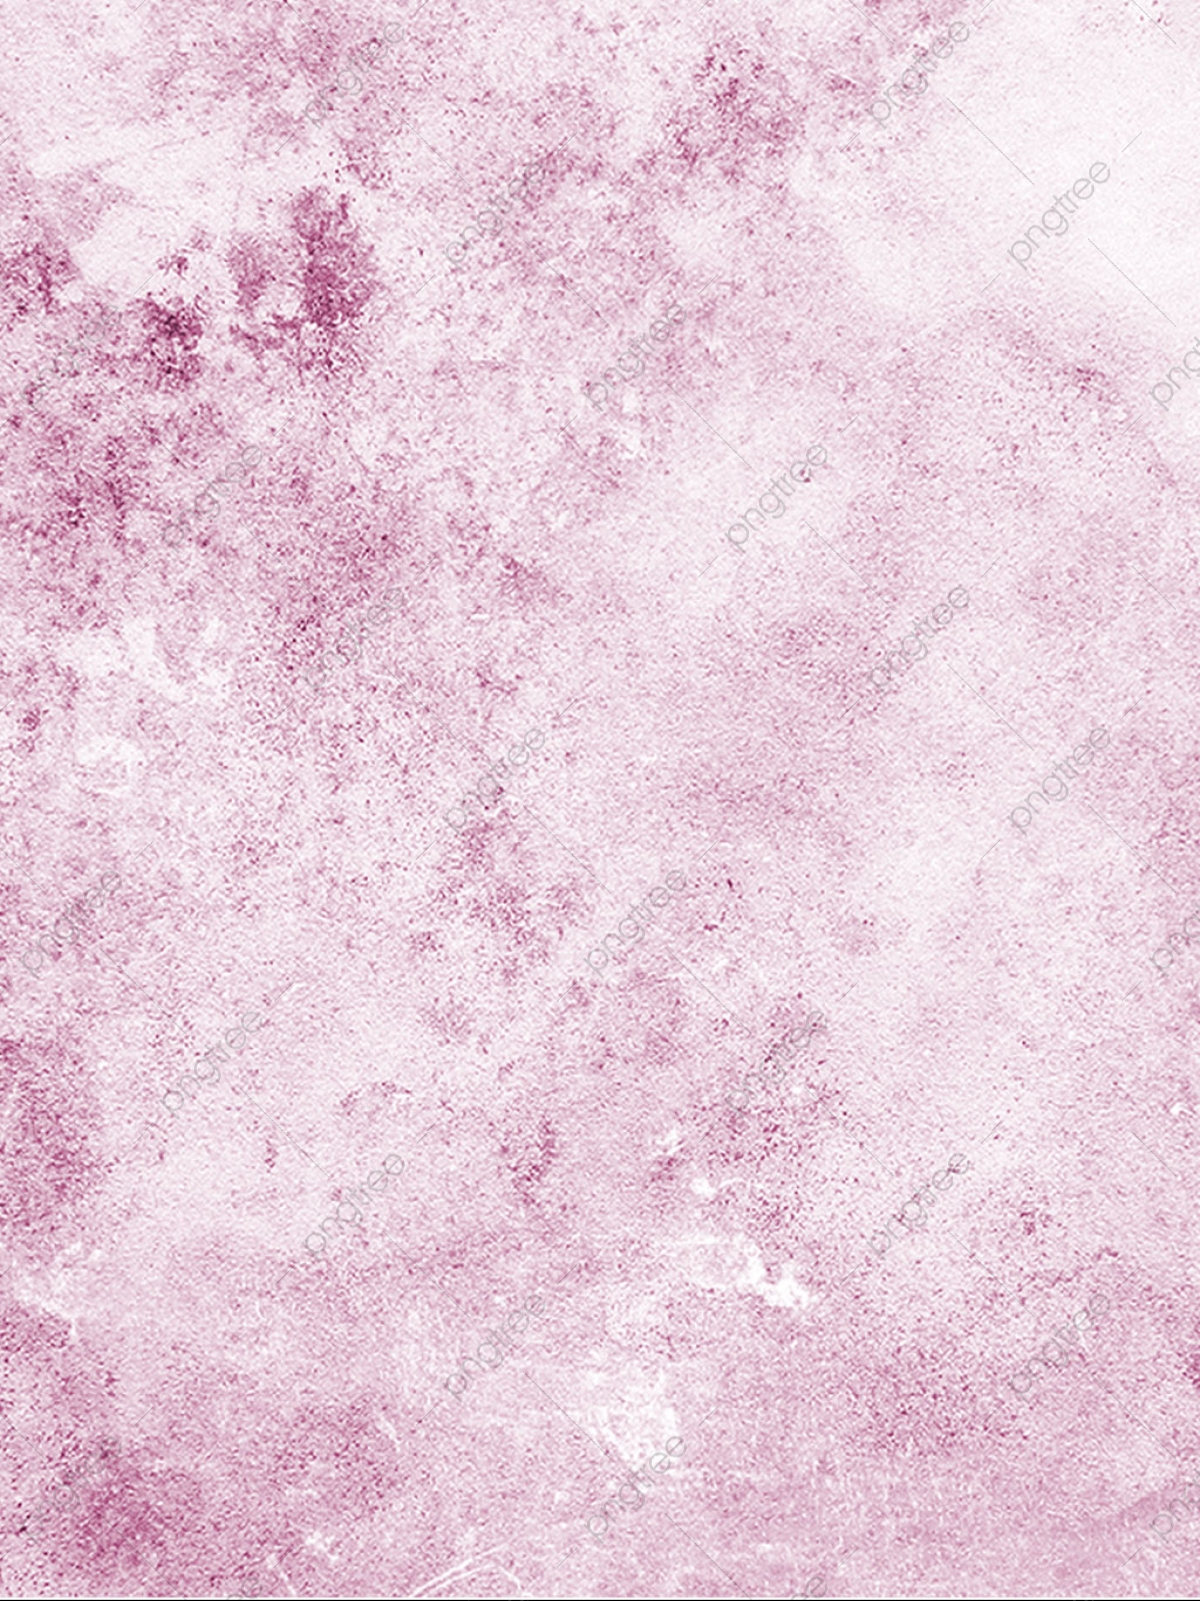 Pink Dust Particles Texture Background, Pink, Dust, Grain Background Image for Free Download